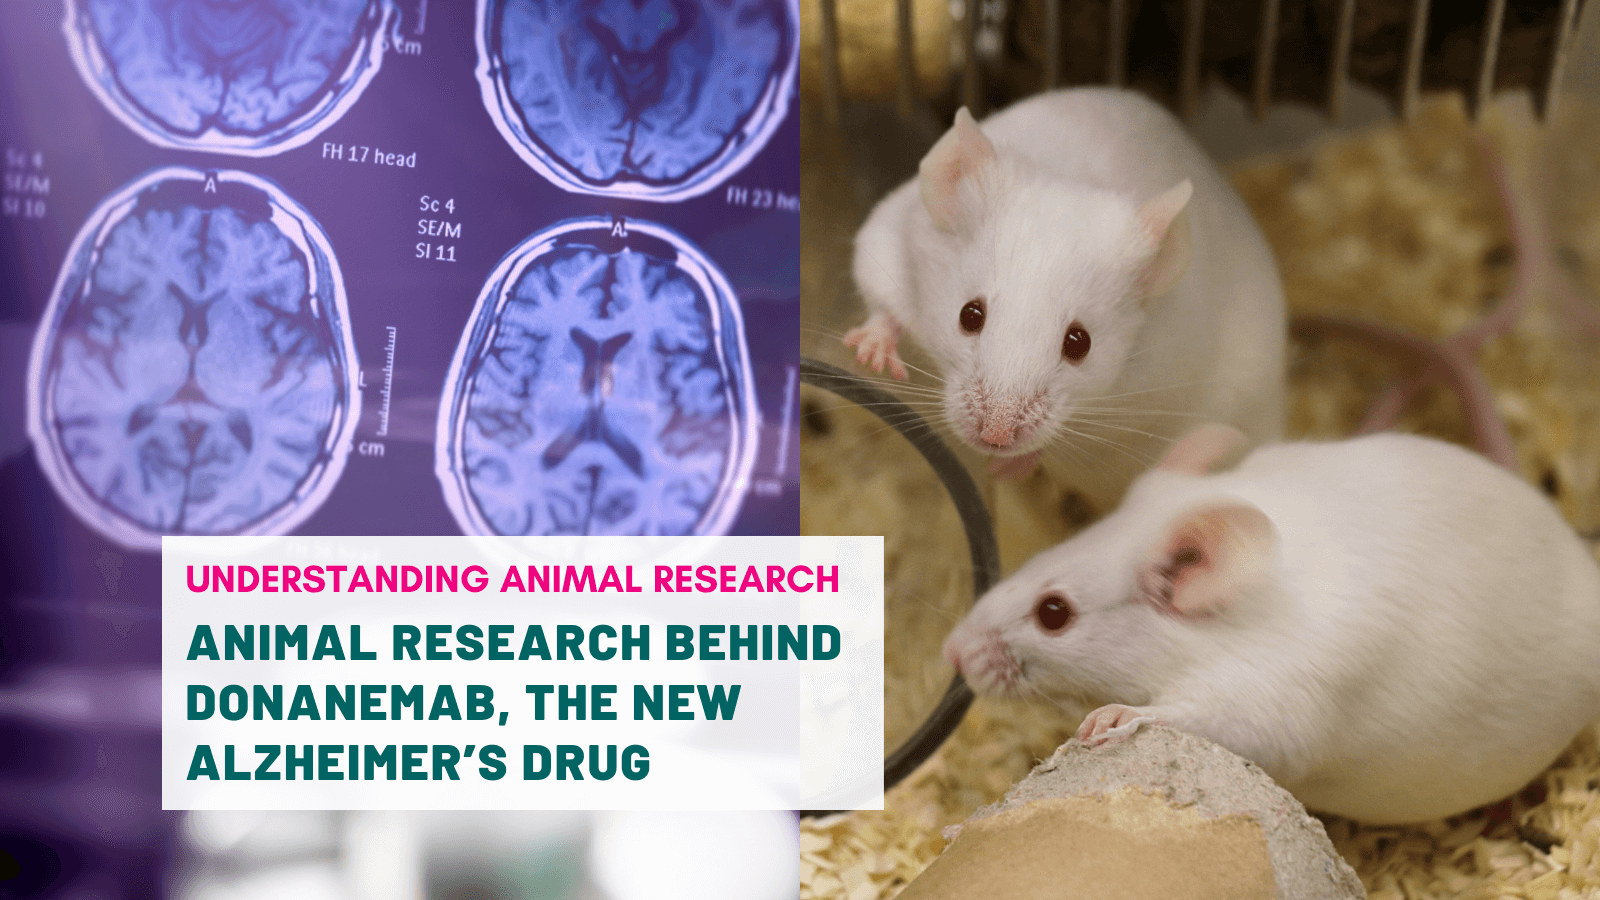 Animal research behind Donanemab, the new Alzheimer’s drug